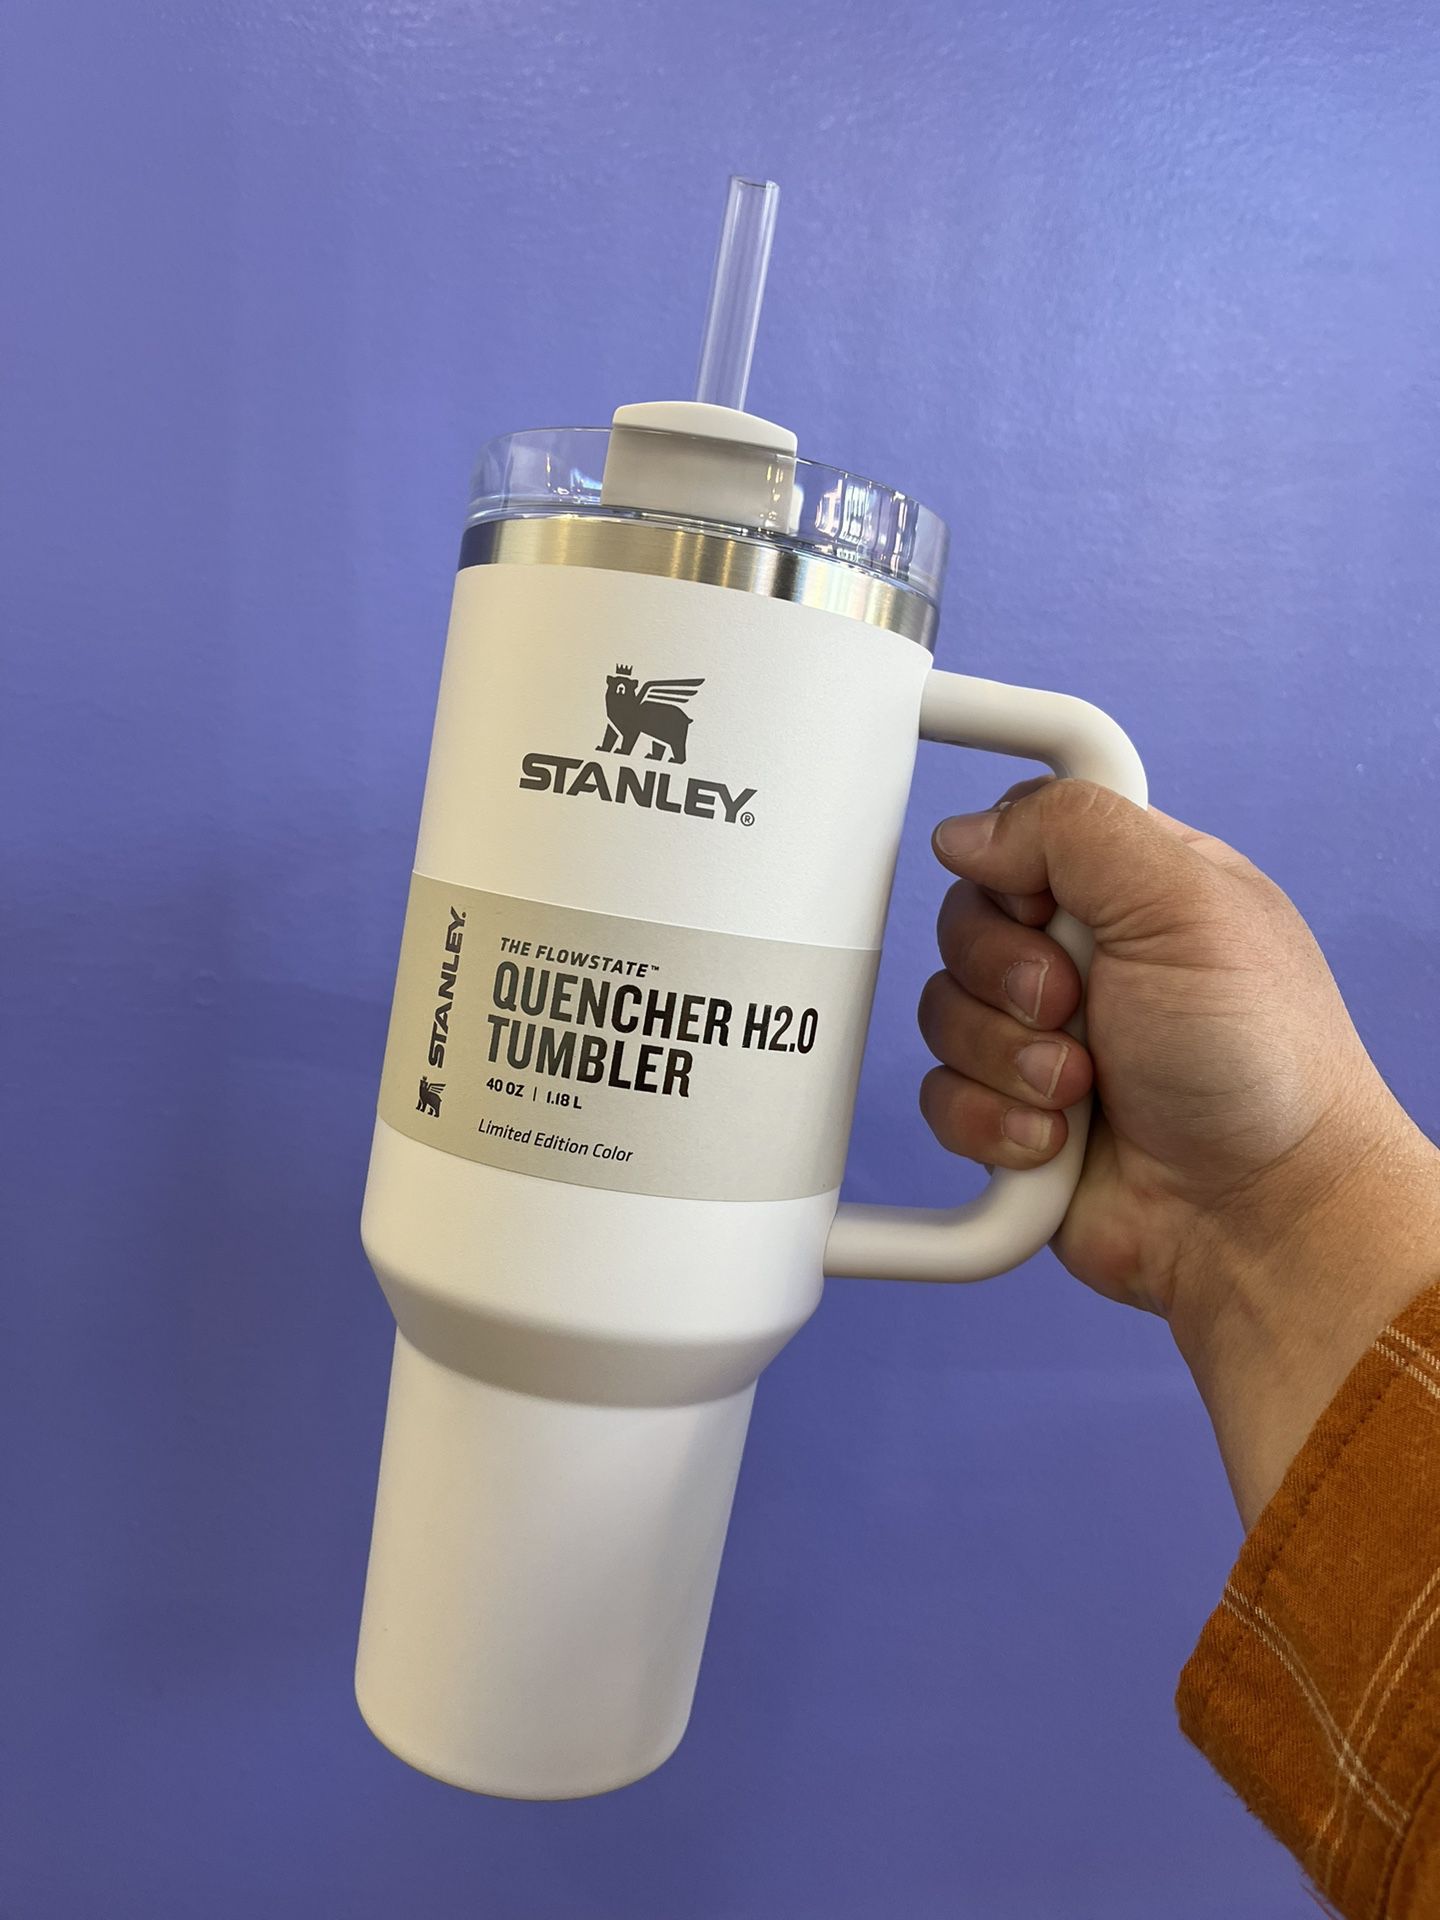 NEW Stanley Quencher H2.0 Tumbler 40oz- Brilliant White- Limited Edition!